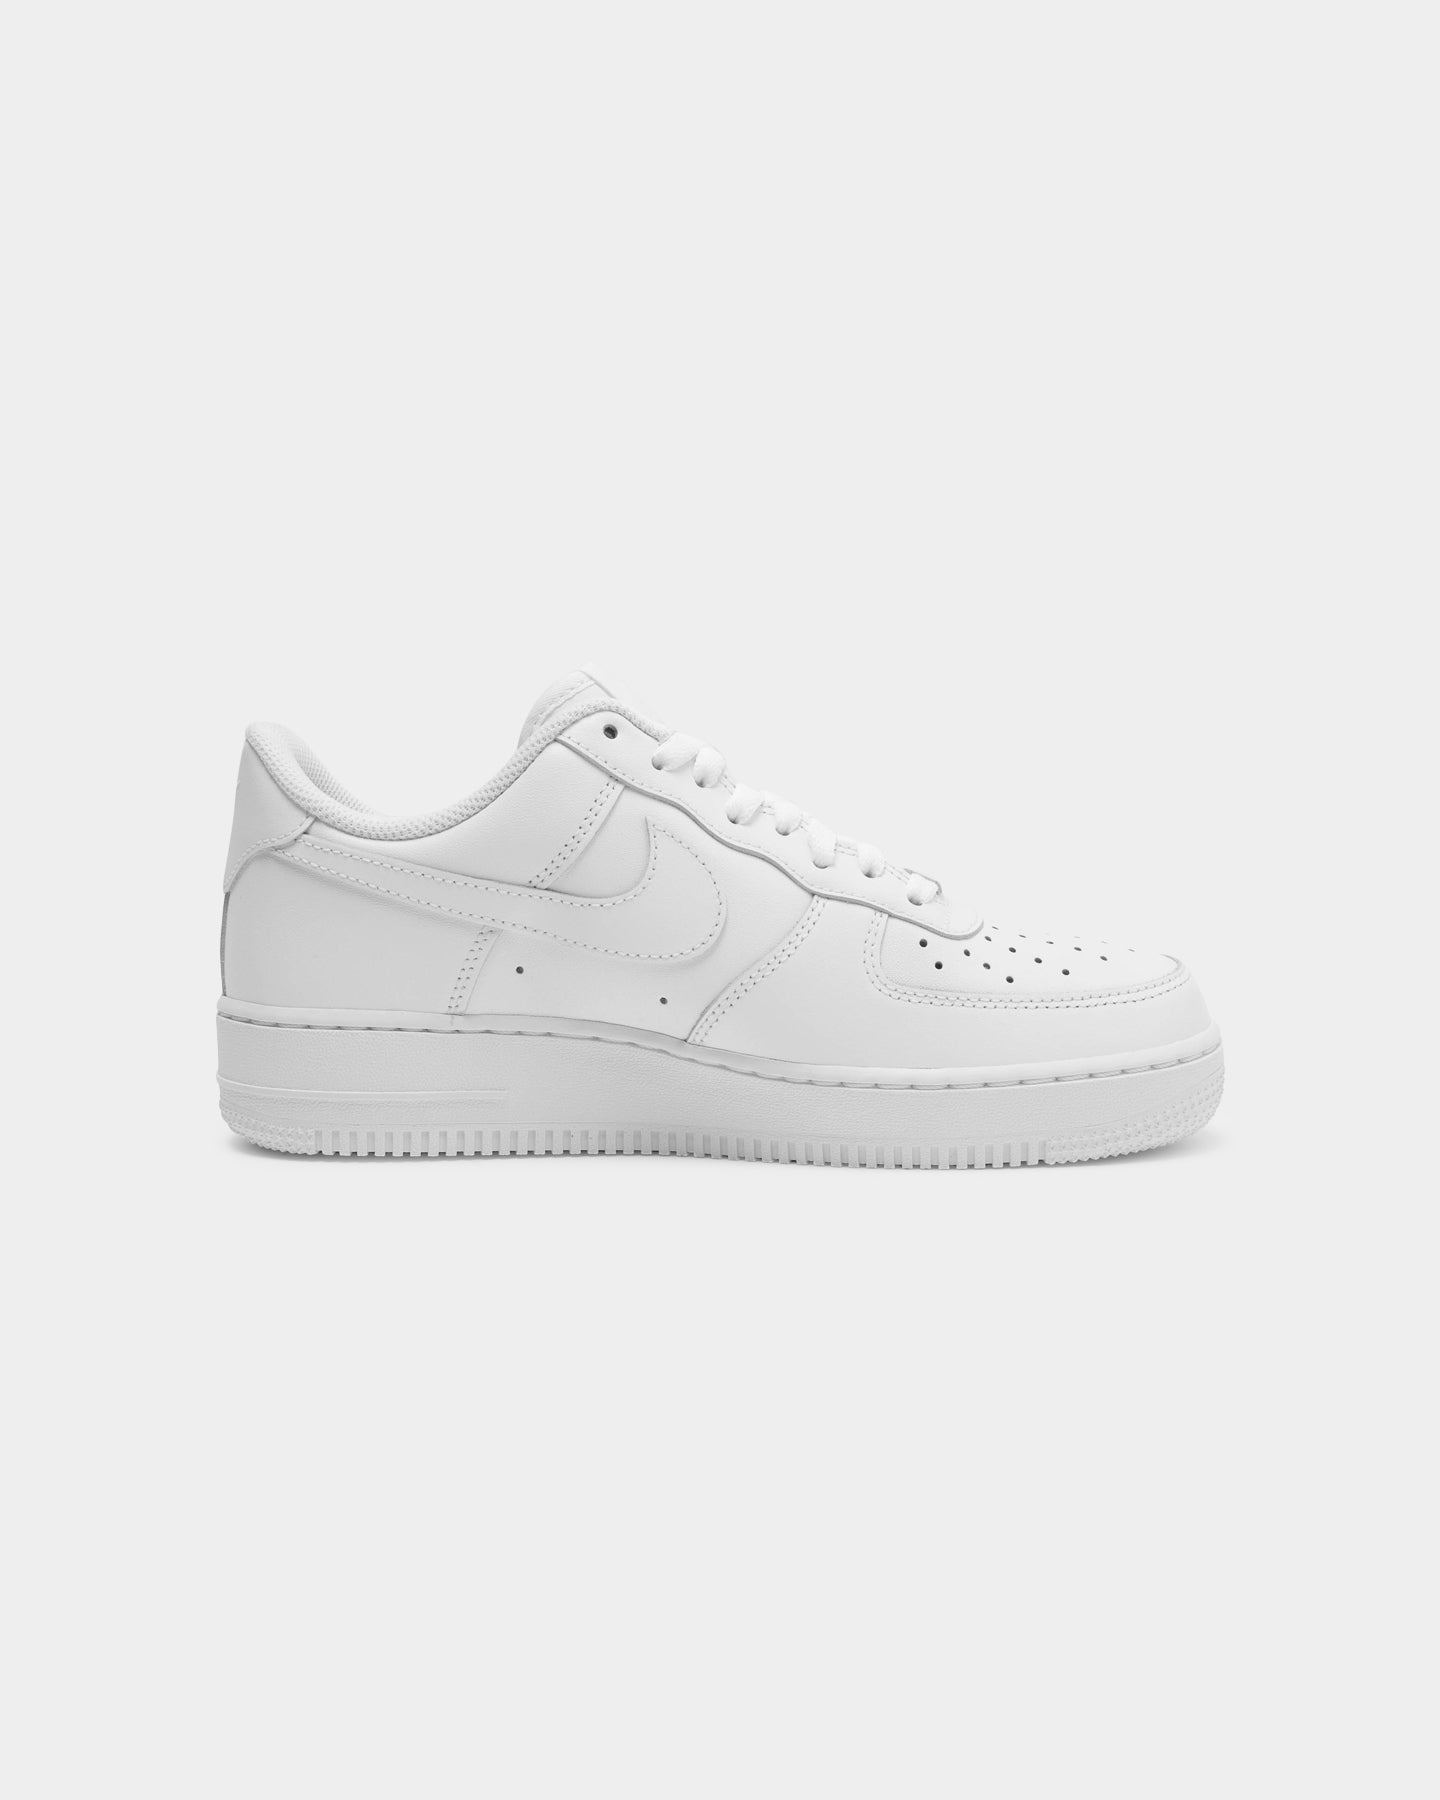 nike air force 1 womens size 6 white